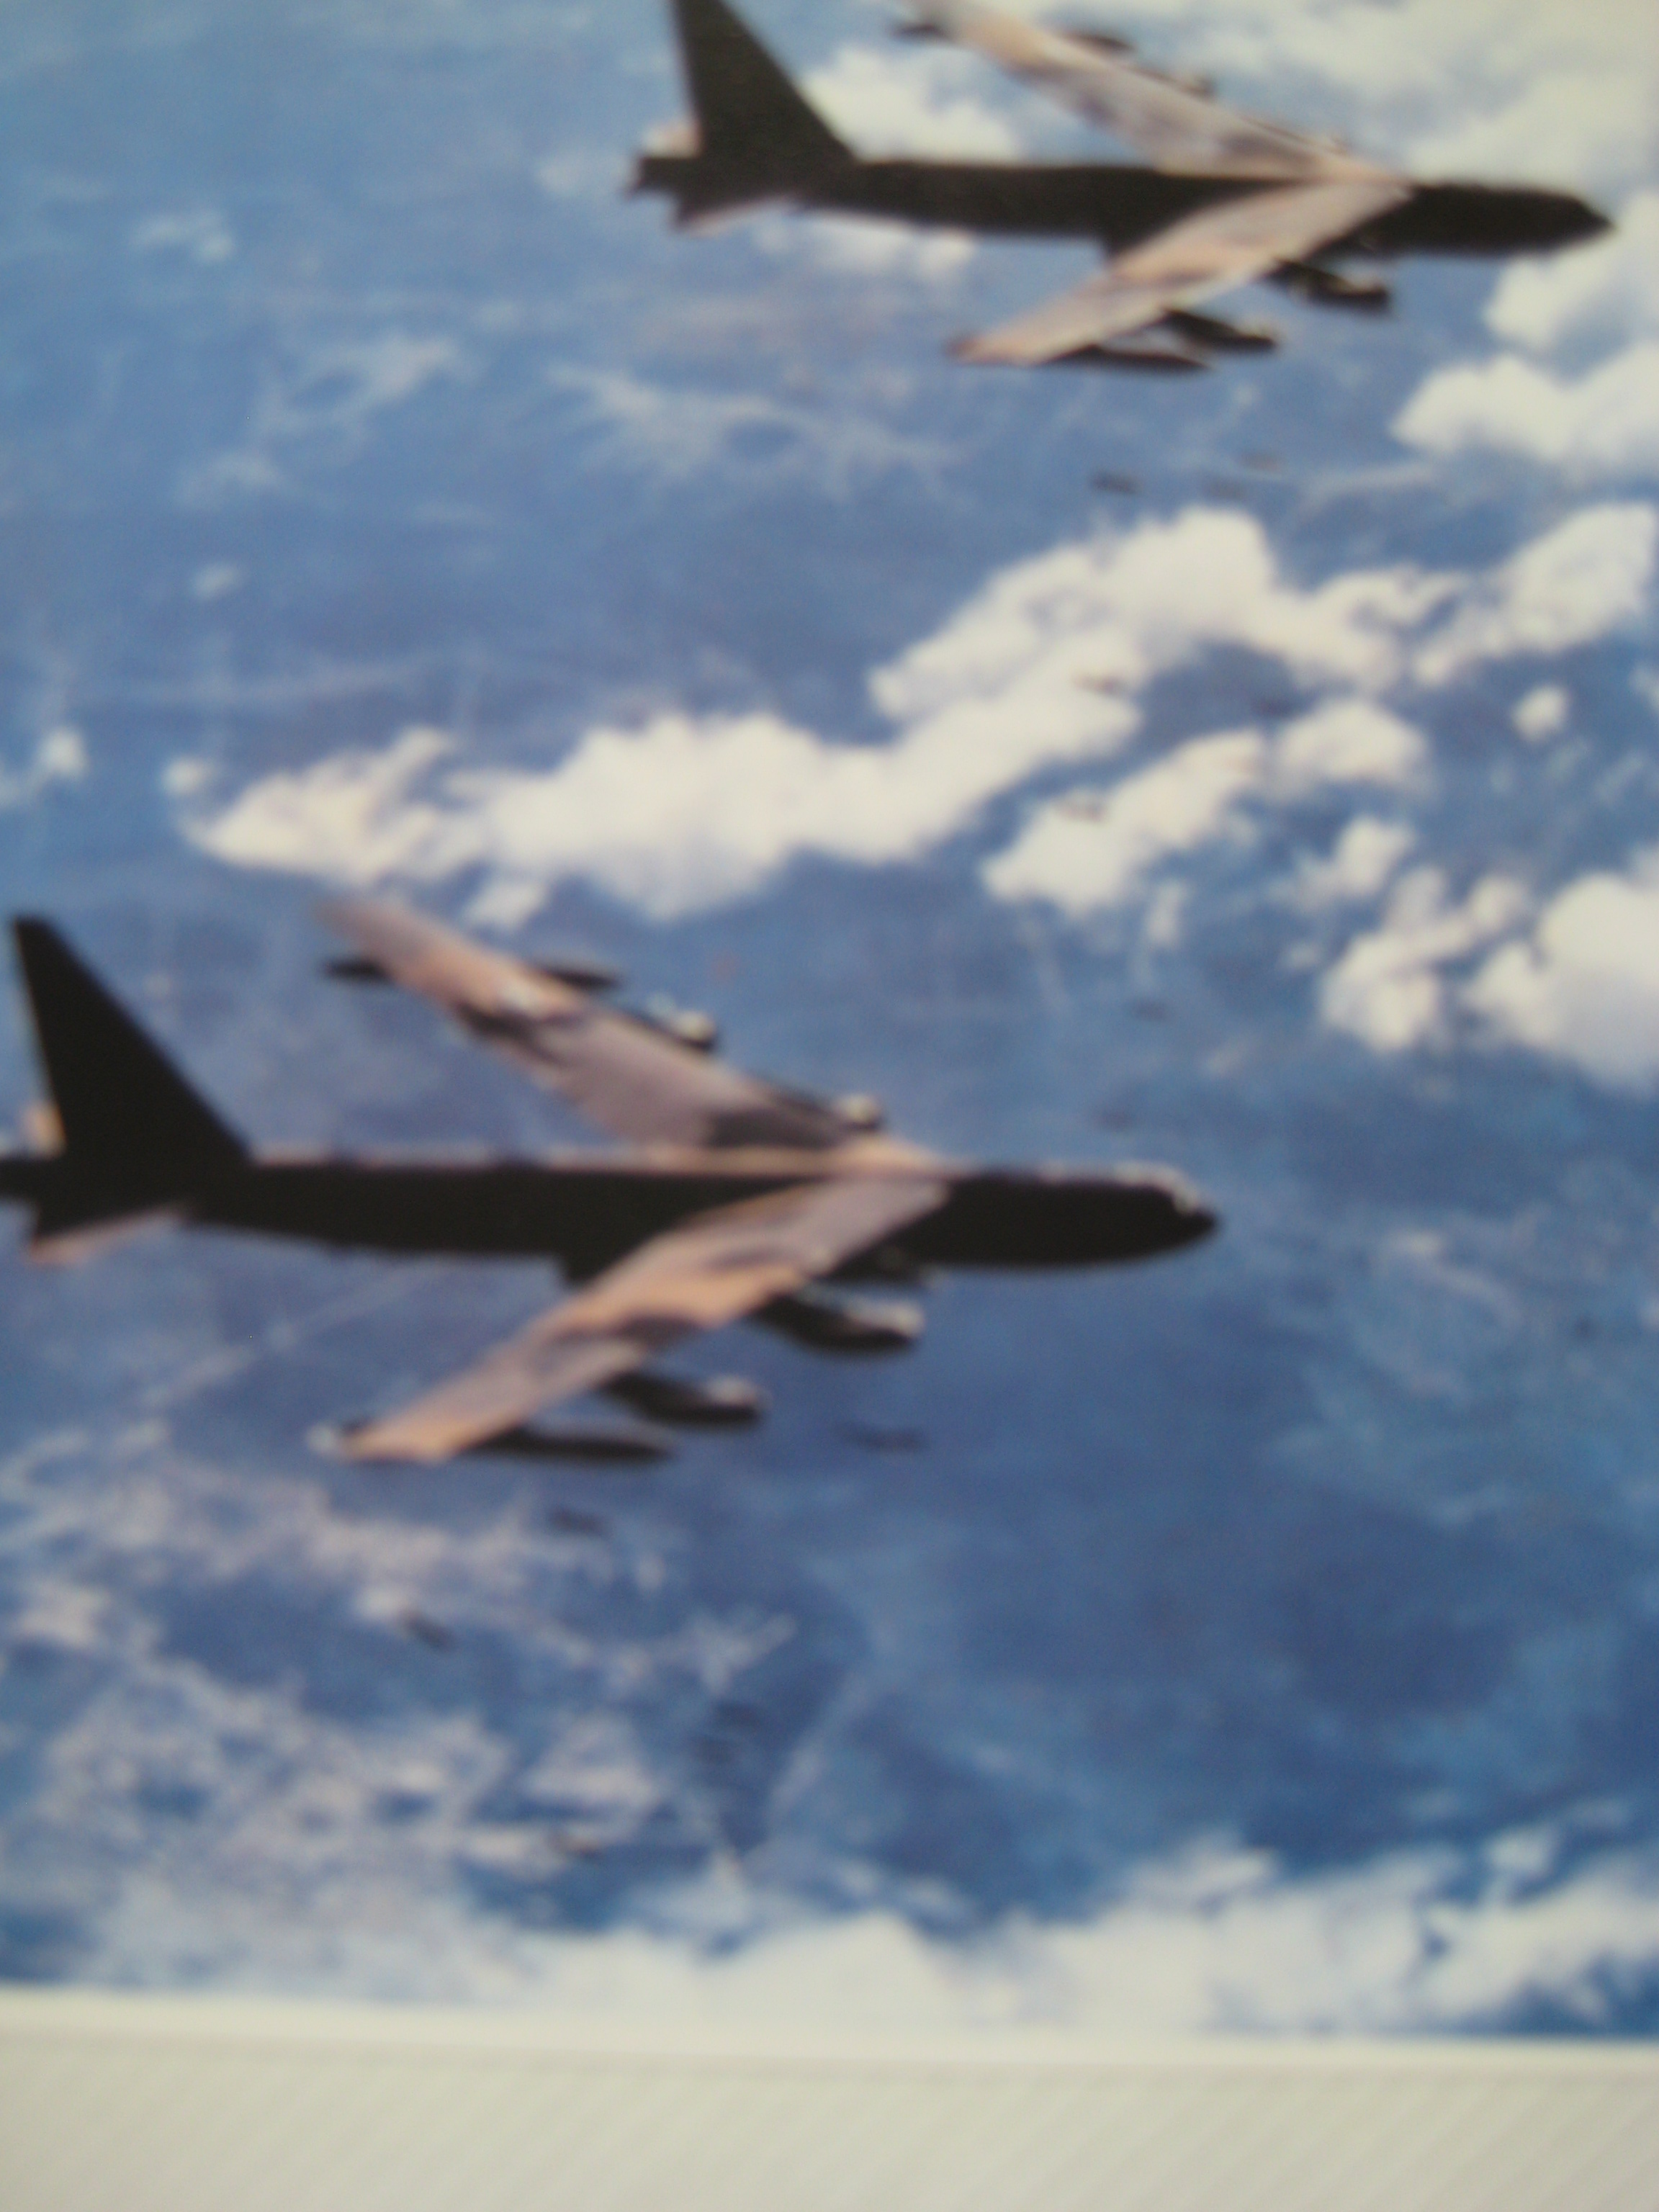 B-52's, used tactically and decisively during the Easter Offensive - 1972